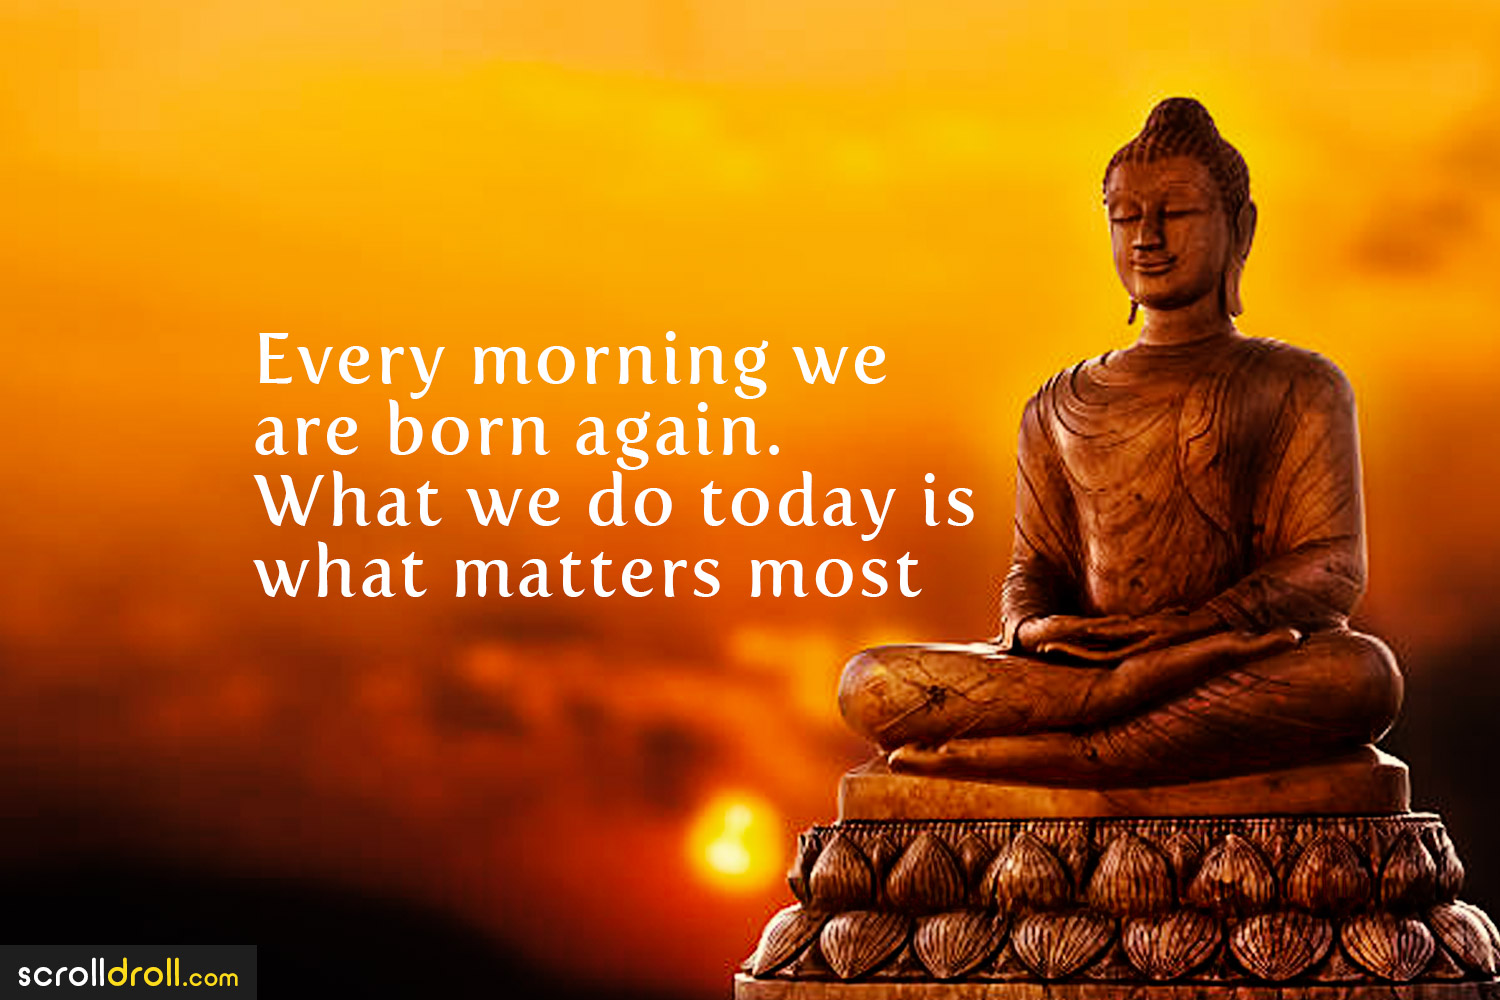 16 Best Buddha Quotes On Love, Life & Peace